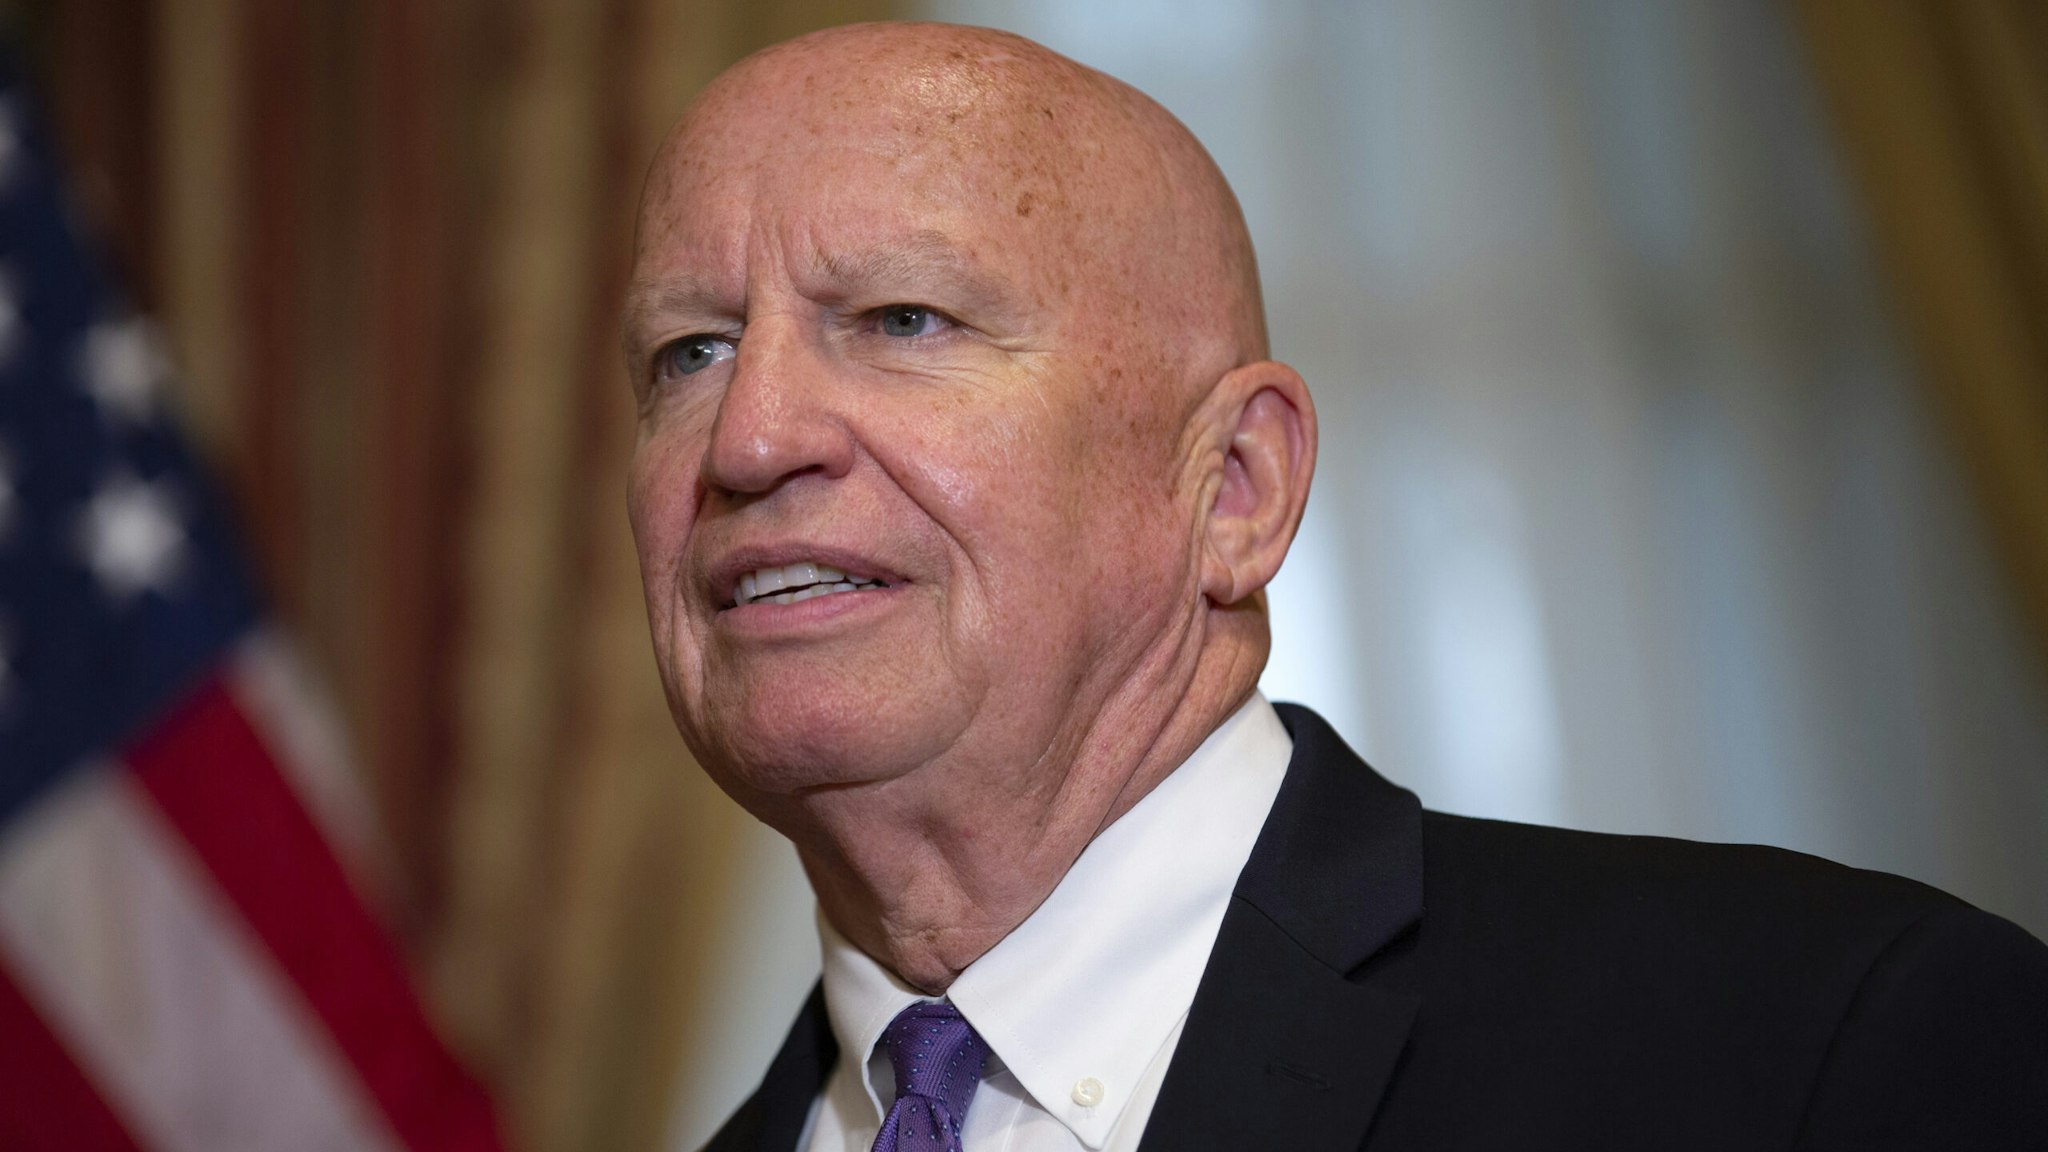 Representative Kevin Brady, a Republican from Texas and ranking member of the House Ways and Means Committee, listens during a bill enrollment ceremony for the Taxpayer First Act on Capitol Hill in Washington D.C., U.S. on Friday, June 21, 2019. President Donald Trump said he called off retaliatory strikes on three Iranian sites following the downing of a U.S. Navy drone because the action would not have been "proportionate." Photographer: